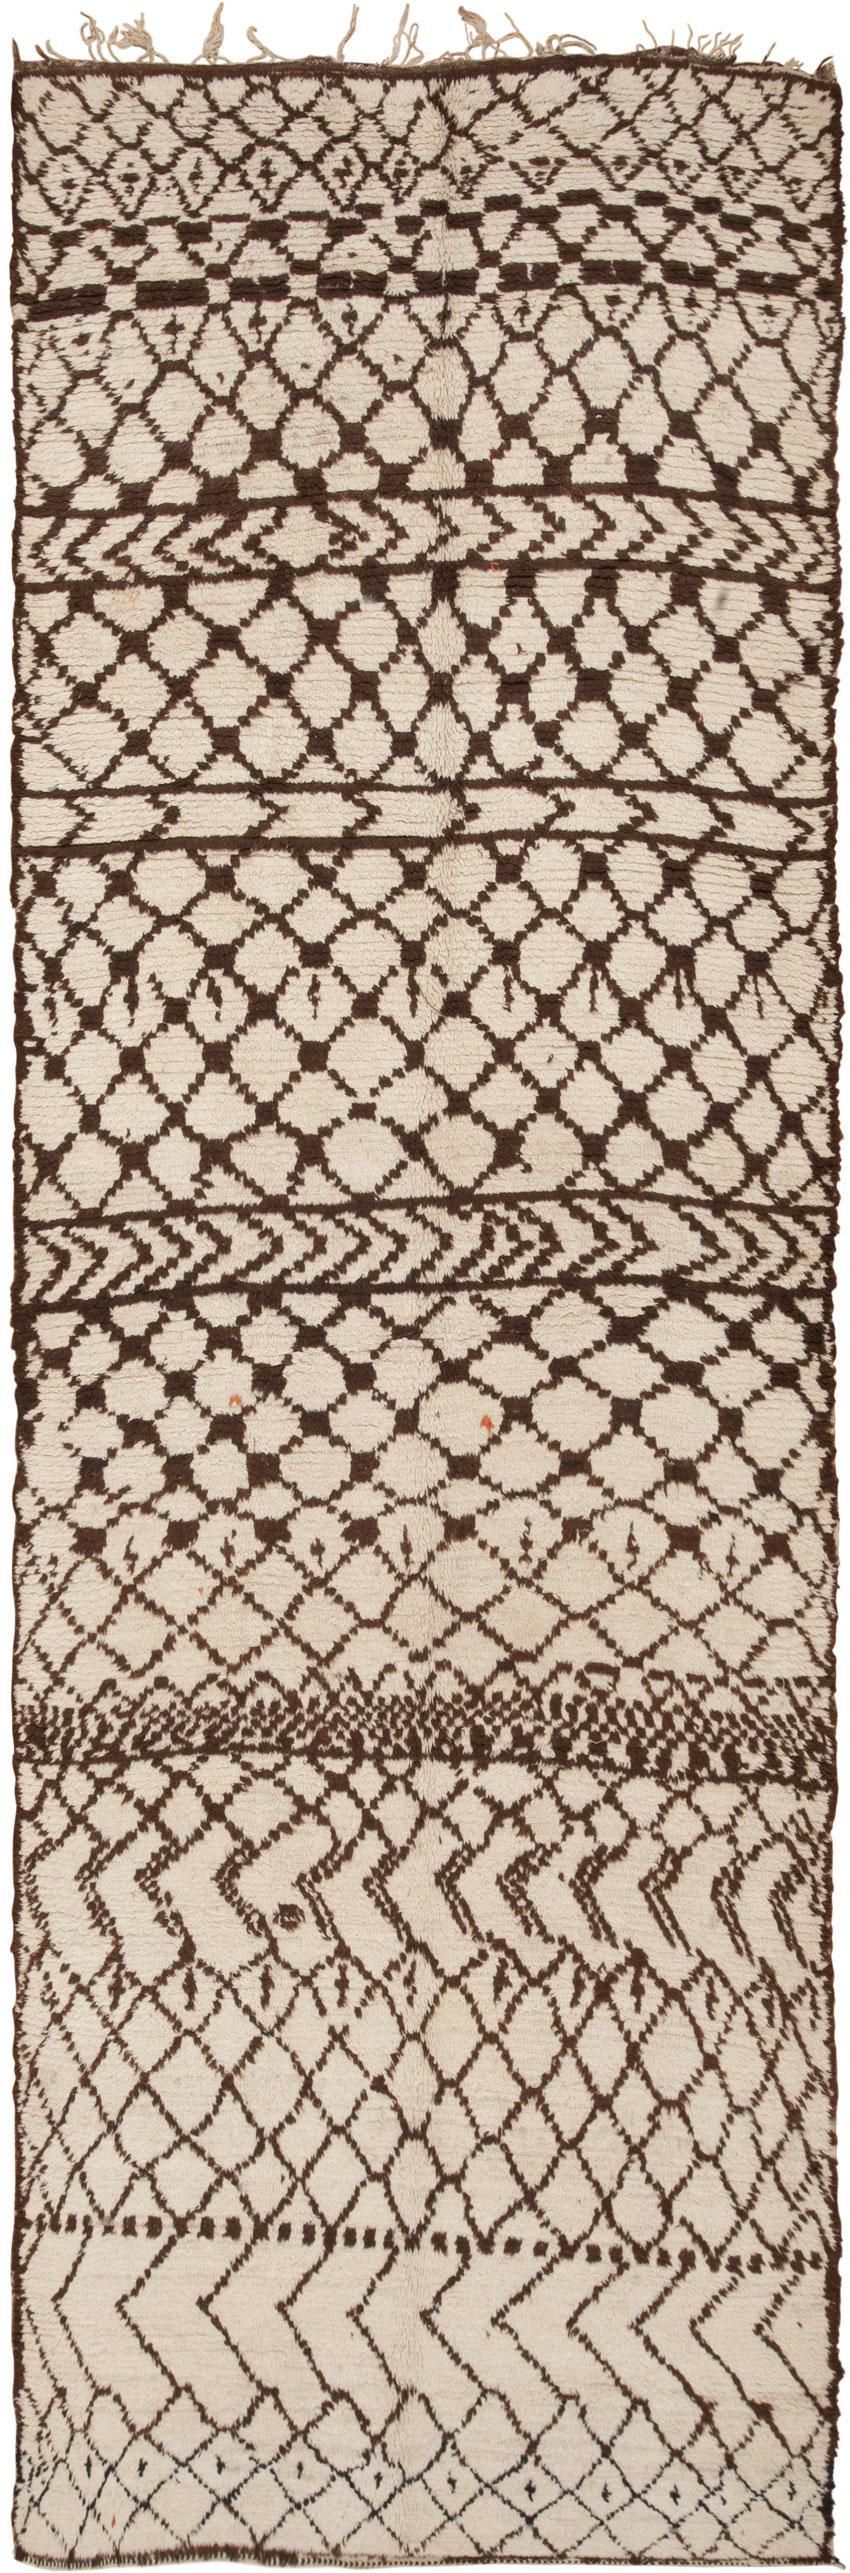 vintage moroccan rug 46043 large view UNHOSKQ